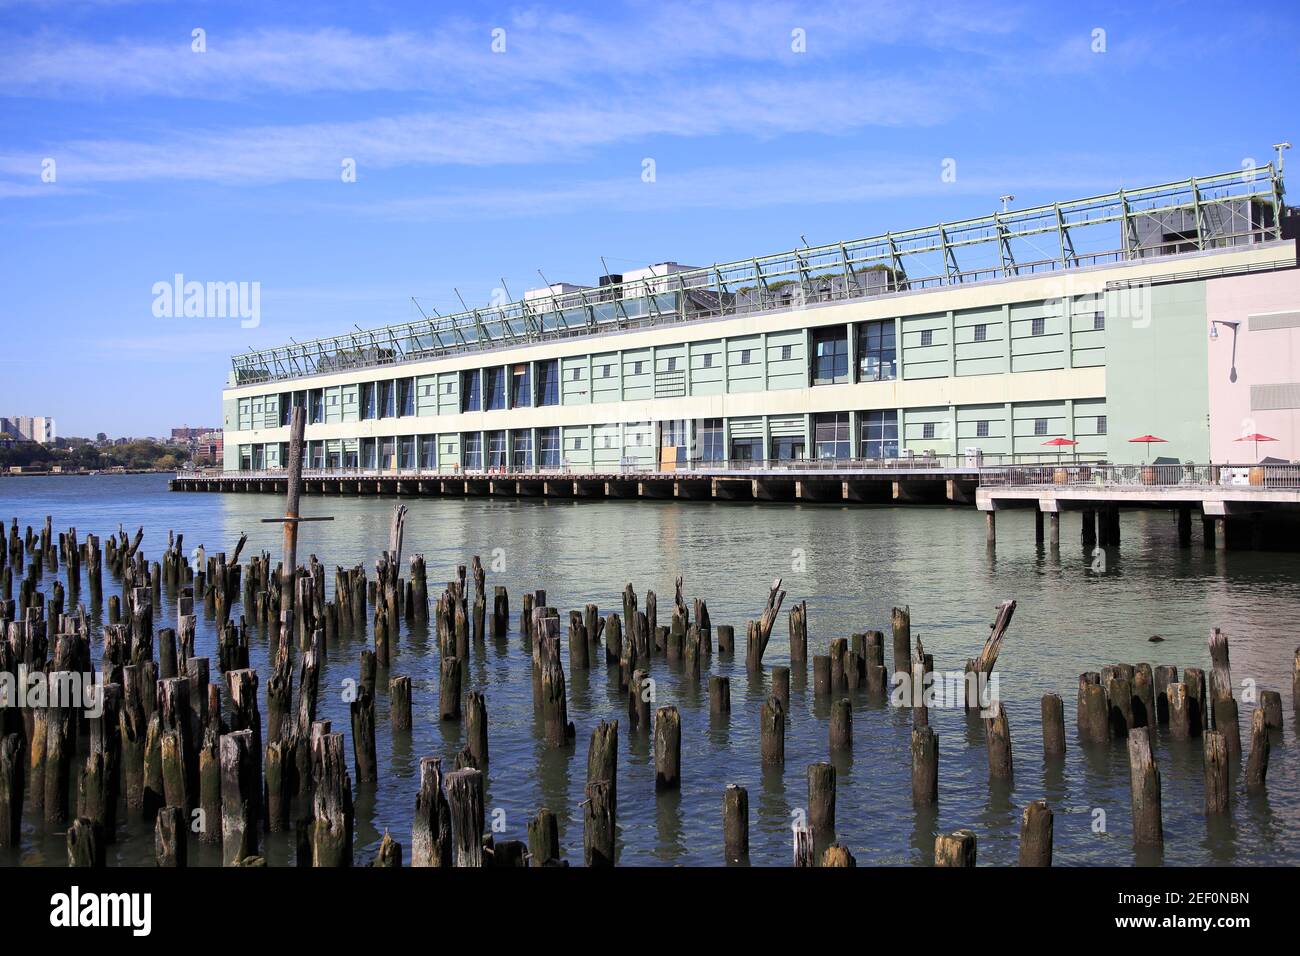 Pier 57, listed in the National Register of Historic Places, is being restored to include a public park, and will be home to restaurants and Google offices, Hudson River, Hudson River Park, Hudson River Greenway, Chelsea, Manhattan, New York City, USA October 2020 Stock Photo